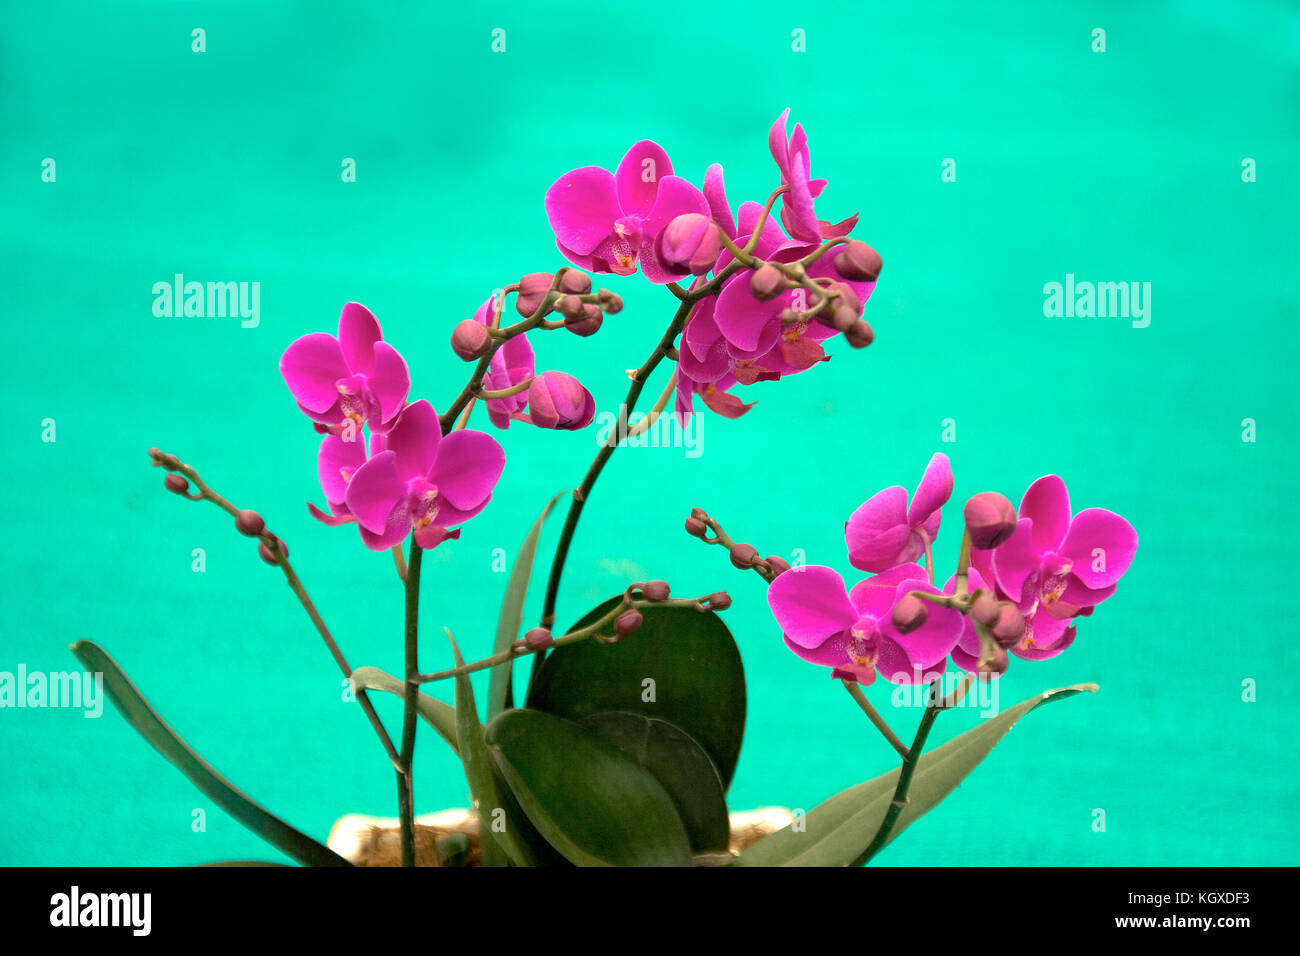 Bunch of Bunch of red orchids set against green background Stock Photo